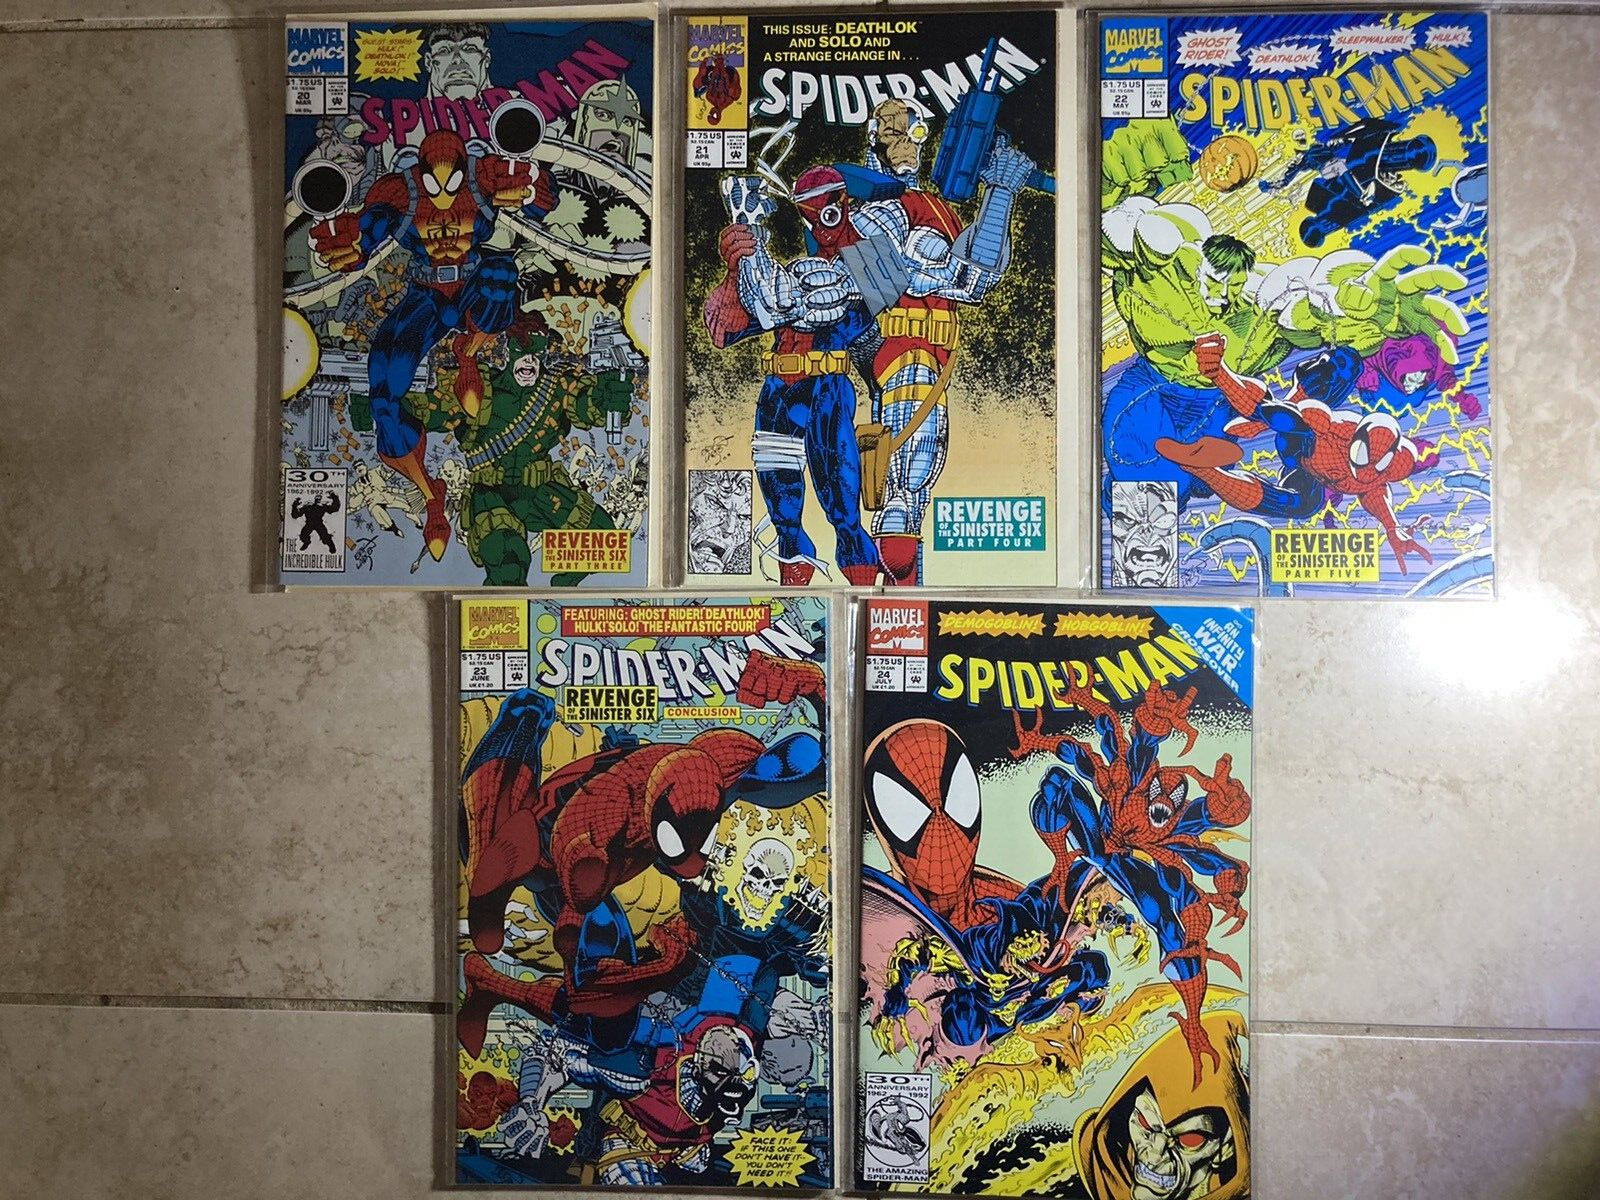 Spider-Man Lot, issues 20, 21, 22, 23, 24, 25, 26, 27, 28, 29.  Very High Grade